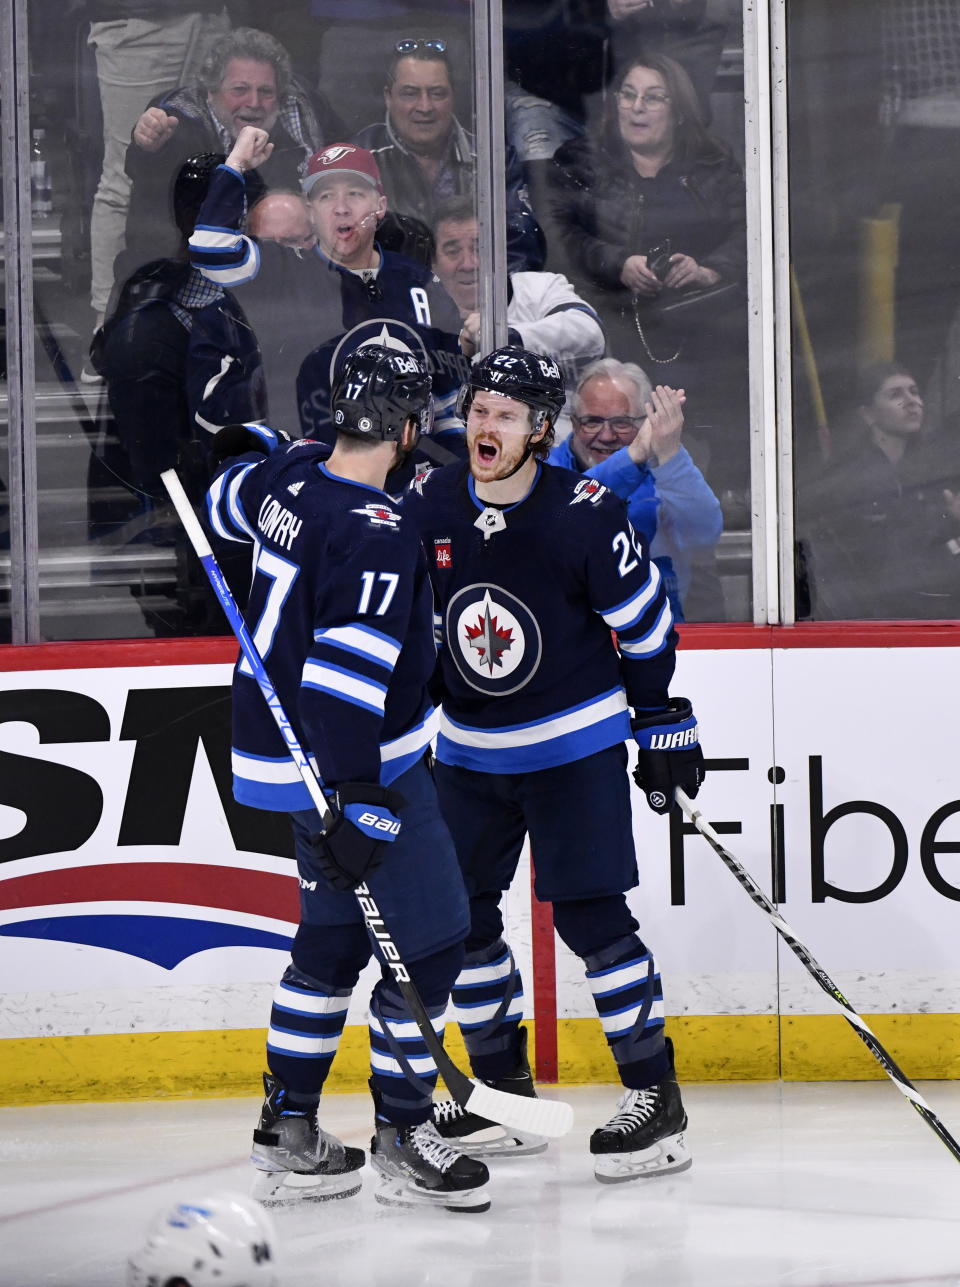 Winnipeg Jets' Mason Appleton celebrates his goal against the San Jose Sharks with Adam Lowry (17) during the third period of an NHL hockey game in Winnipeg, Manitoba, on Monday April 10, 2023. (Fred Greenslade/The Canadian Press via AP)